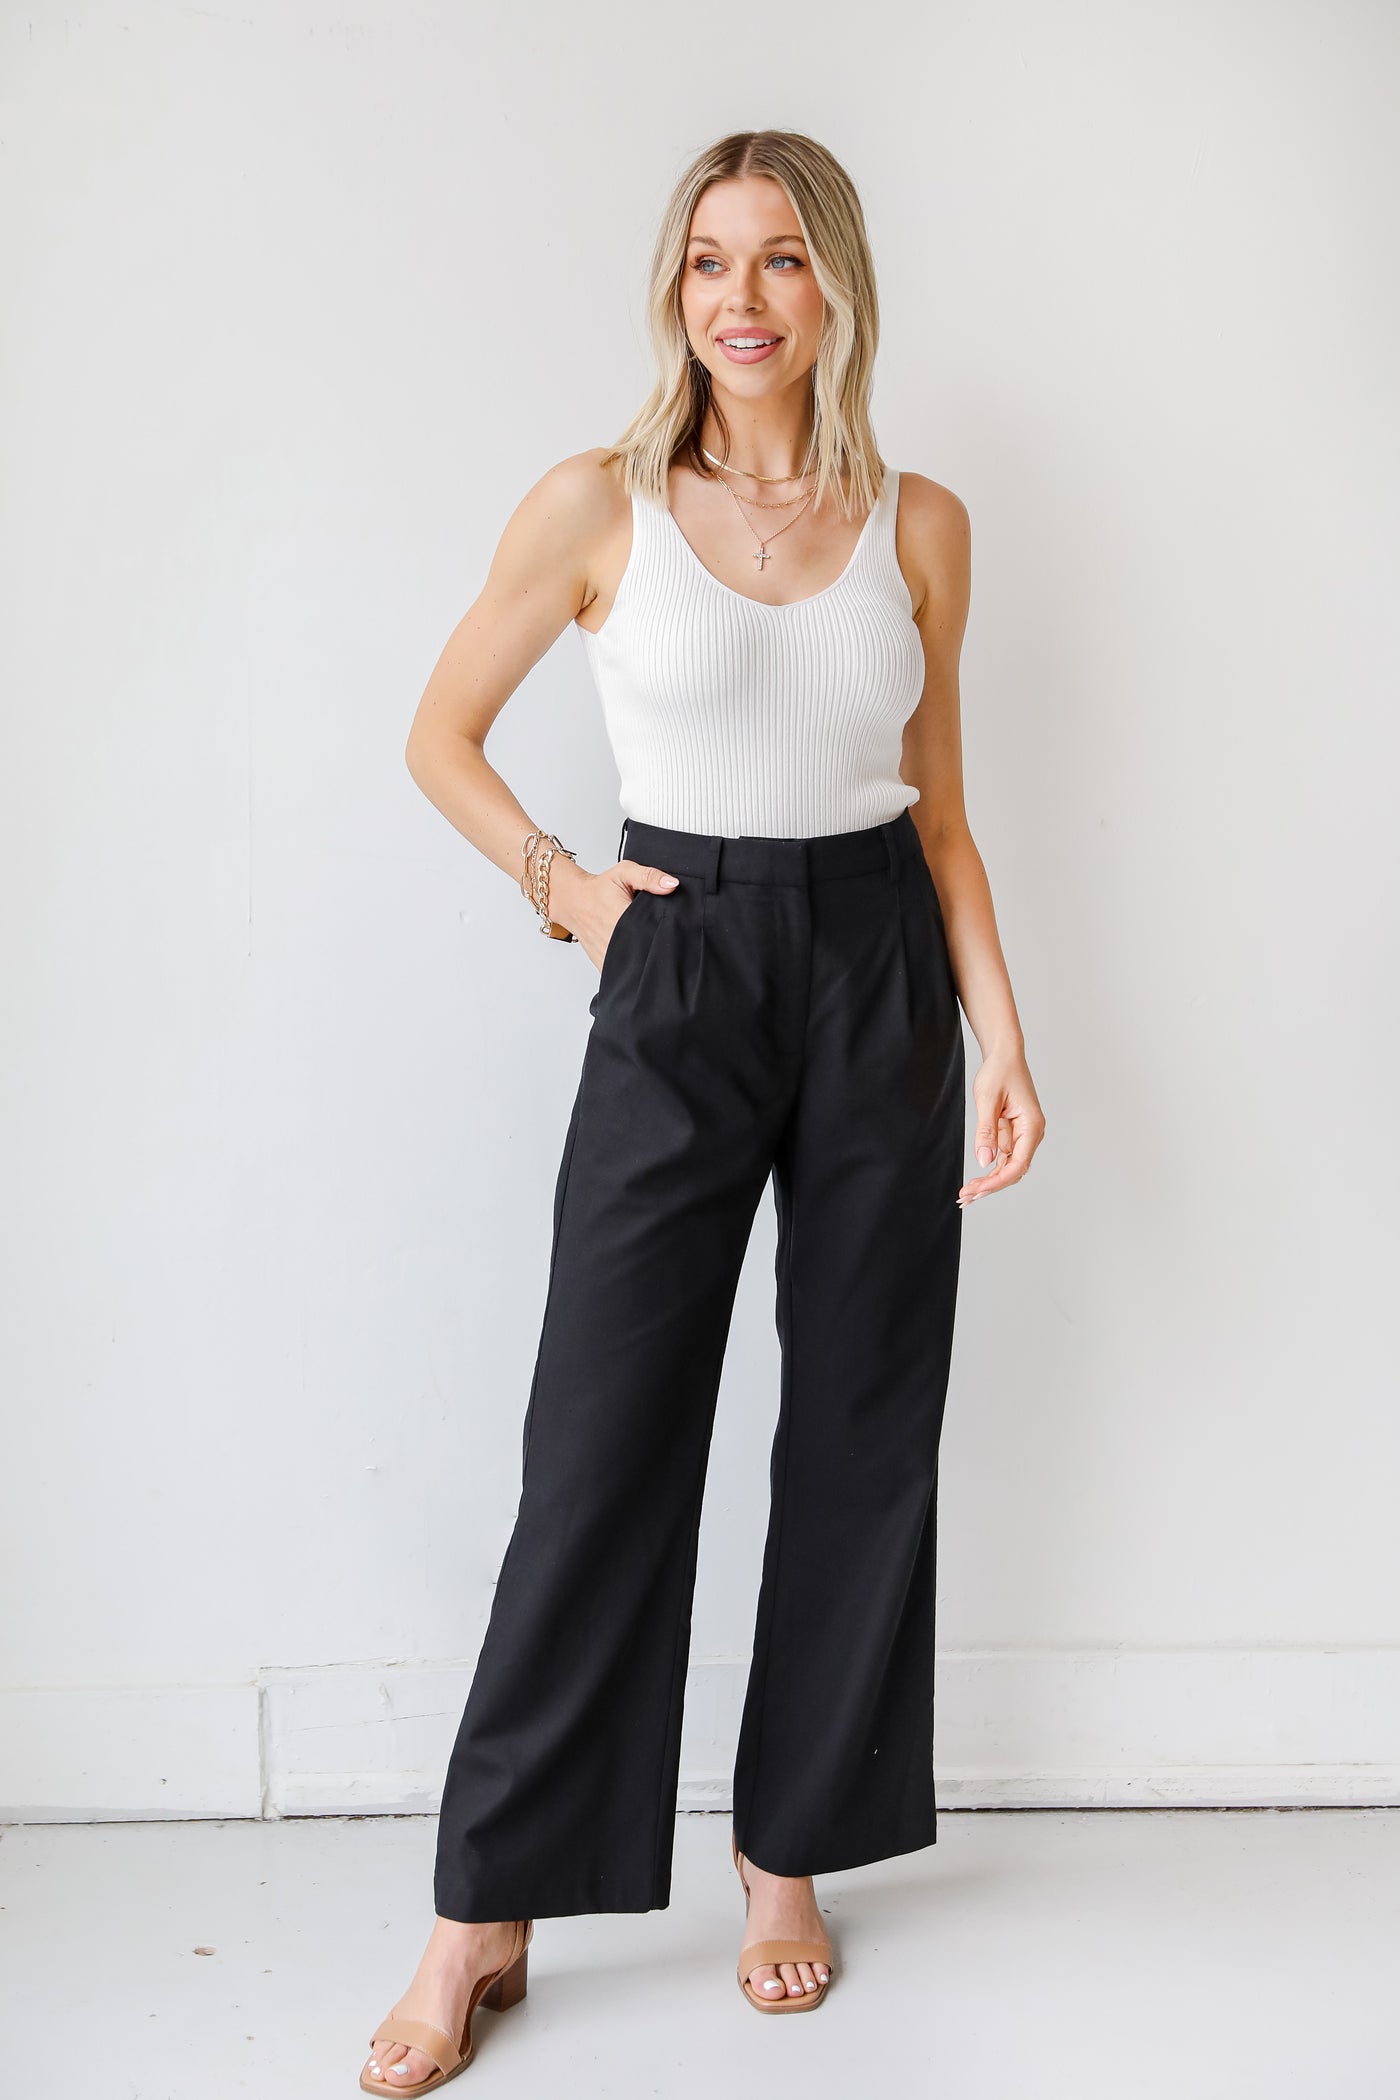 Trouser Pants in black front view